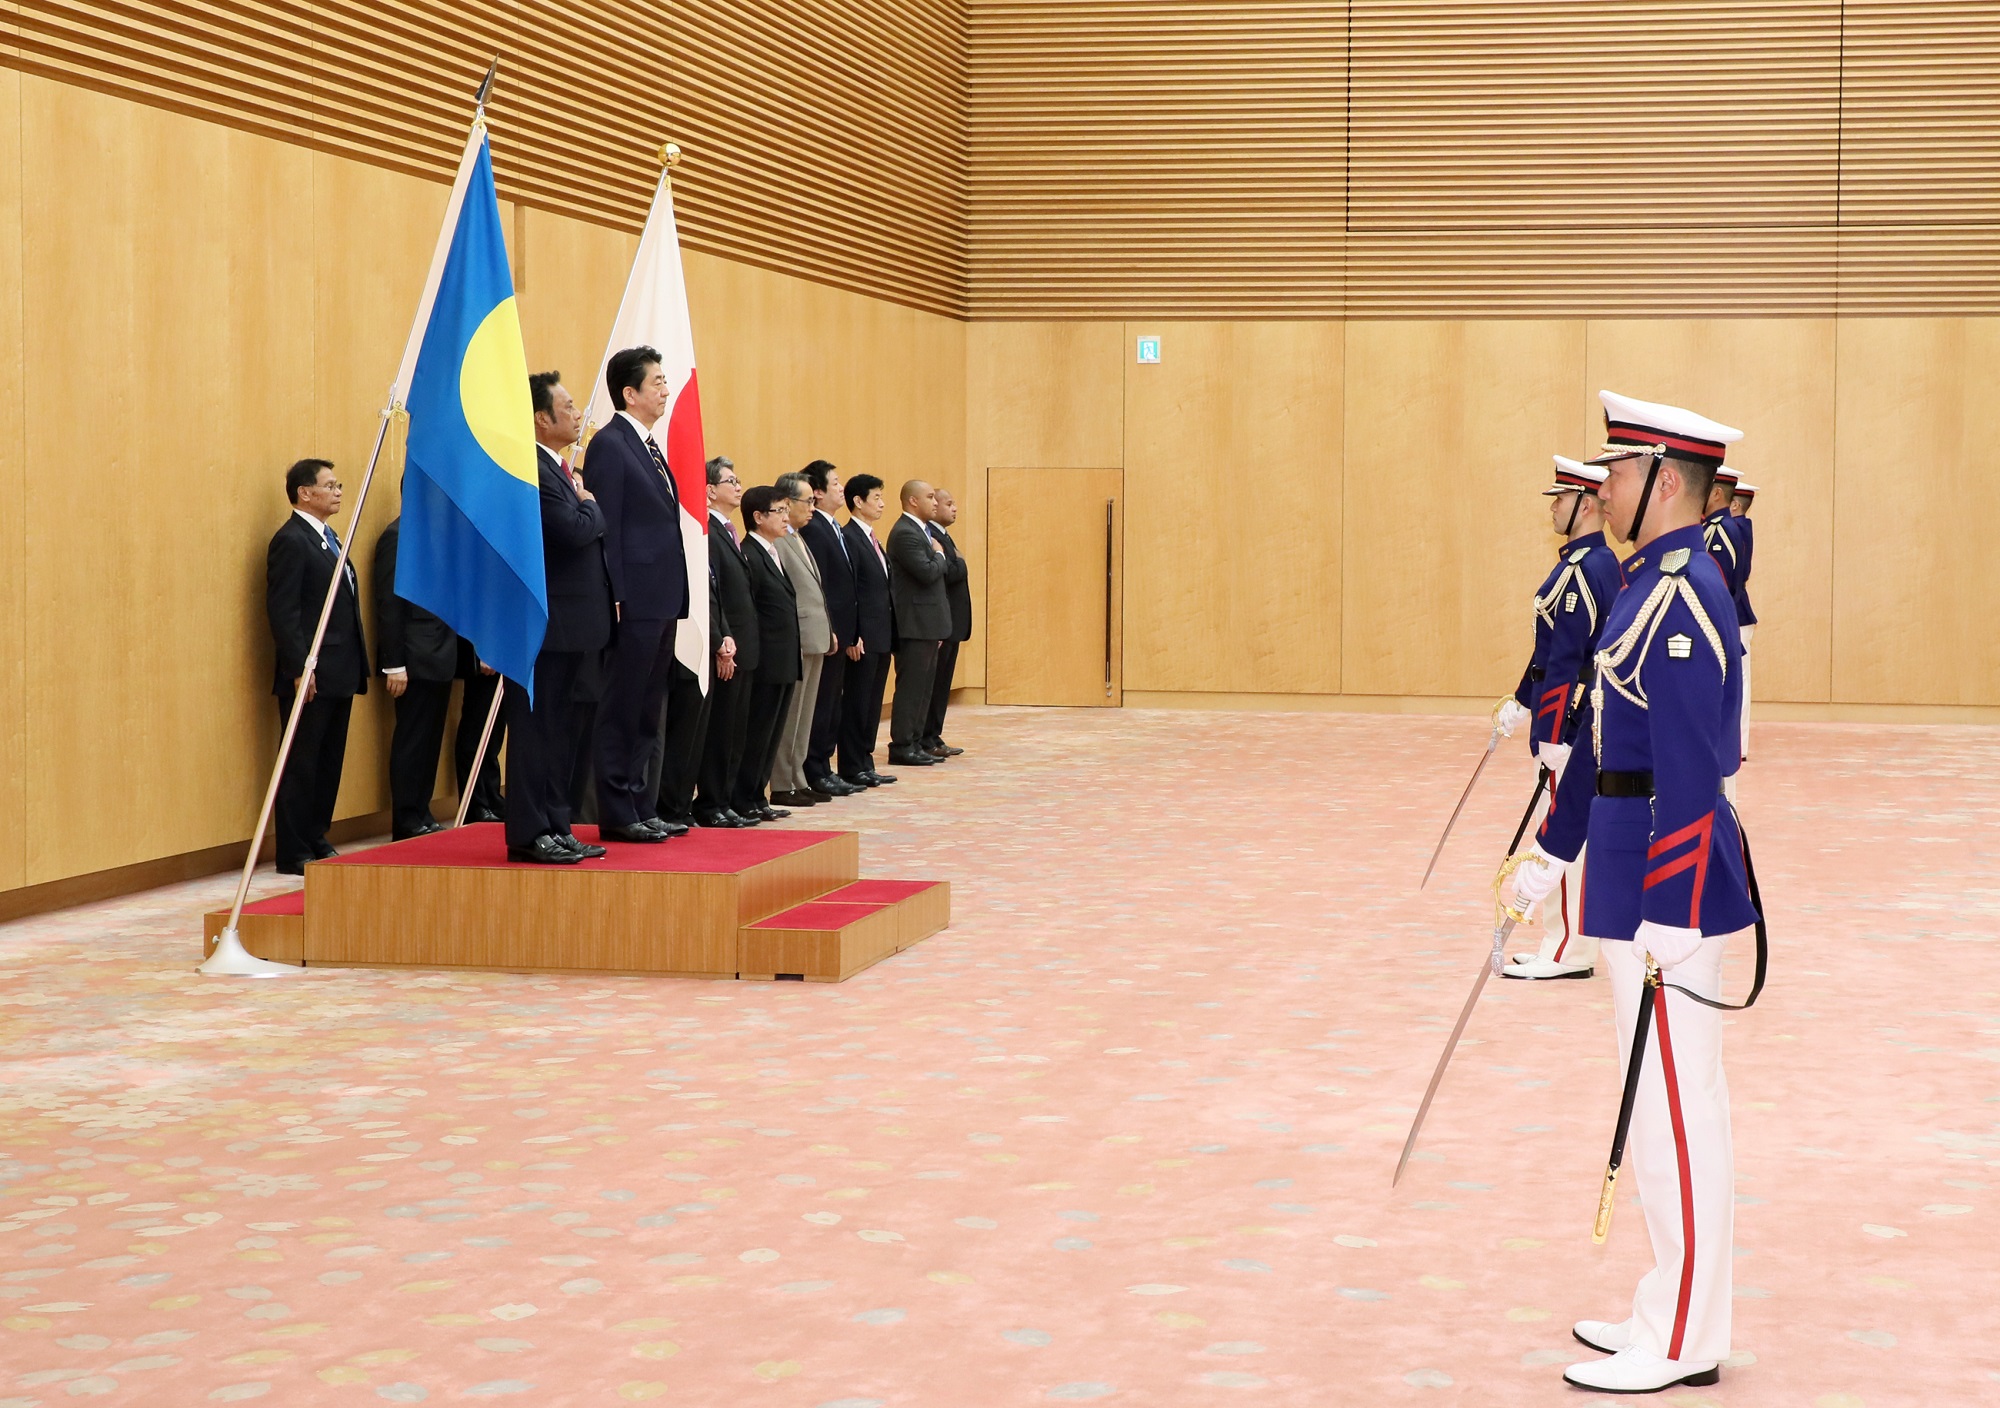 Photograph of the salute and the guard of honor ceremony